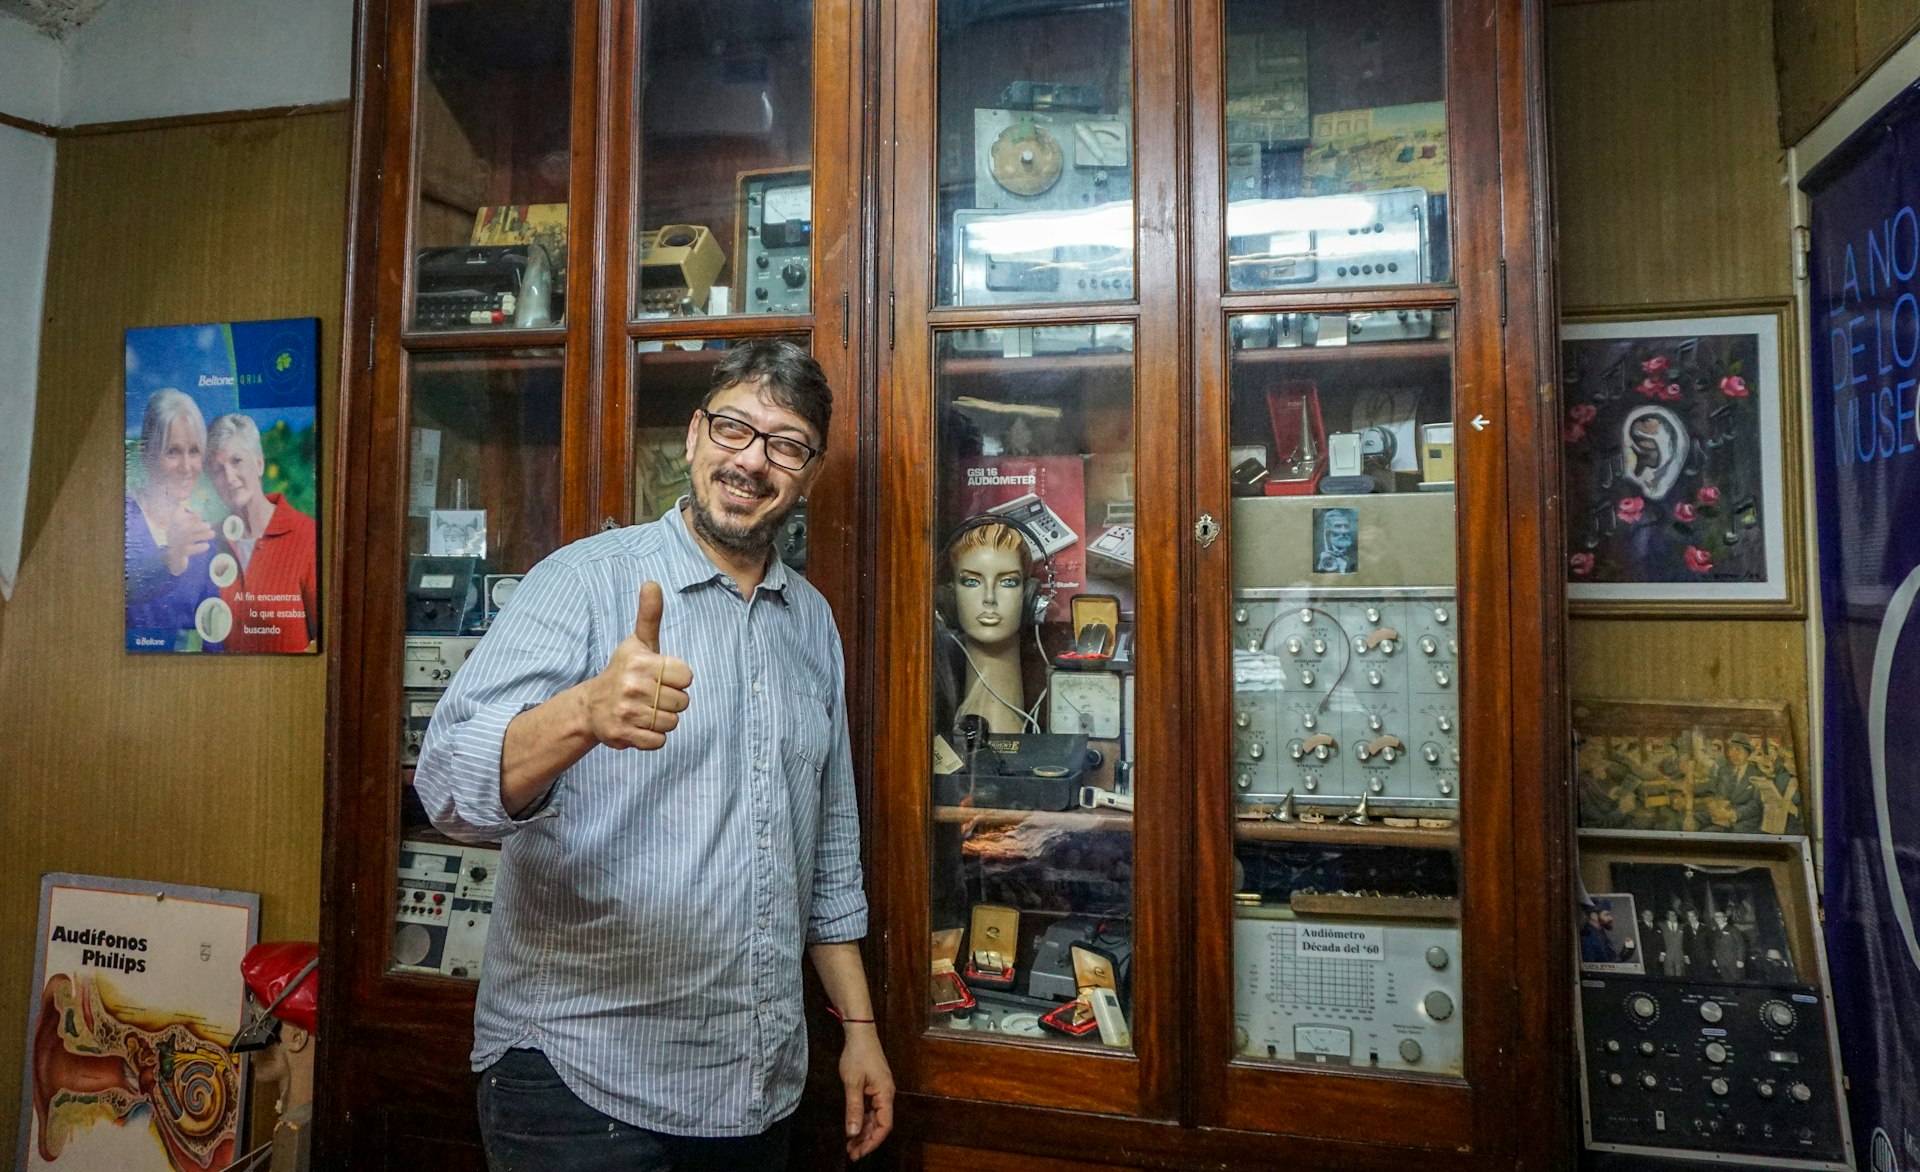 A man in a blue striped shirt and glasses giving the thumbs up stands in front of a cabinet full of hearing aid technology